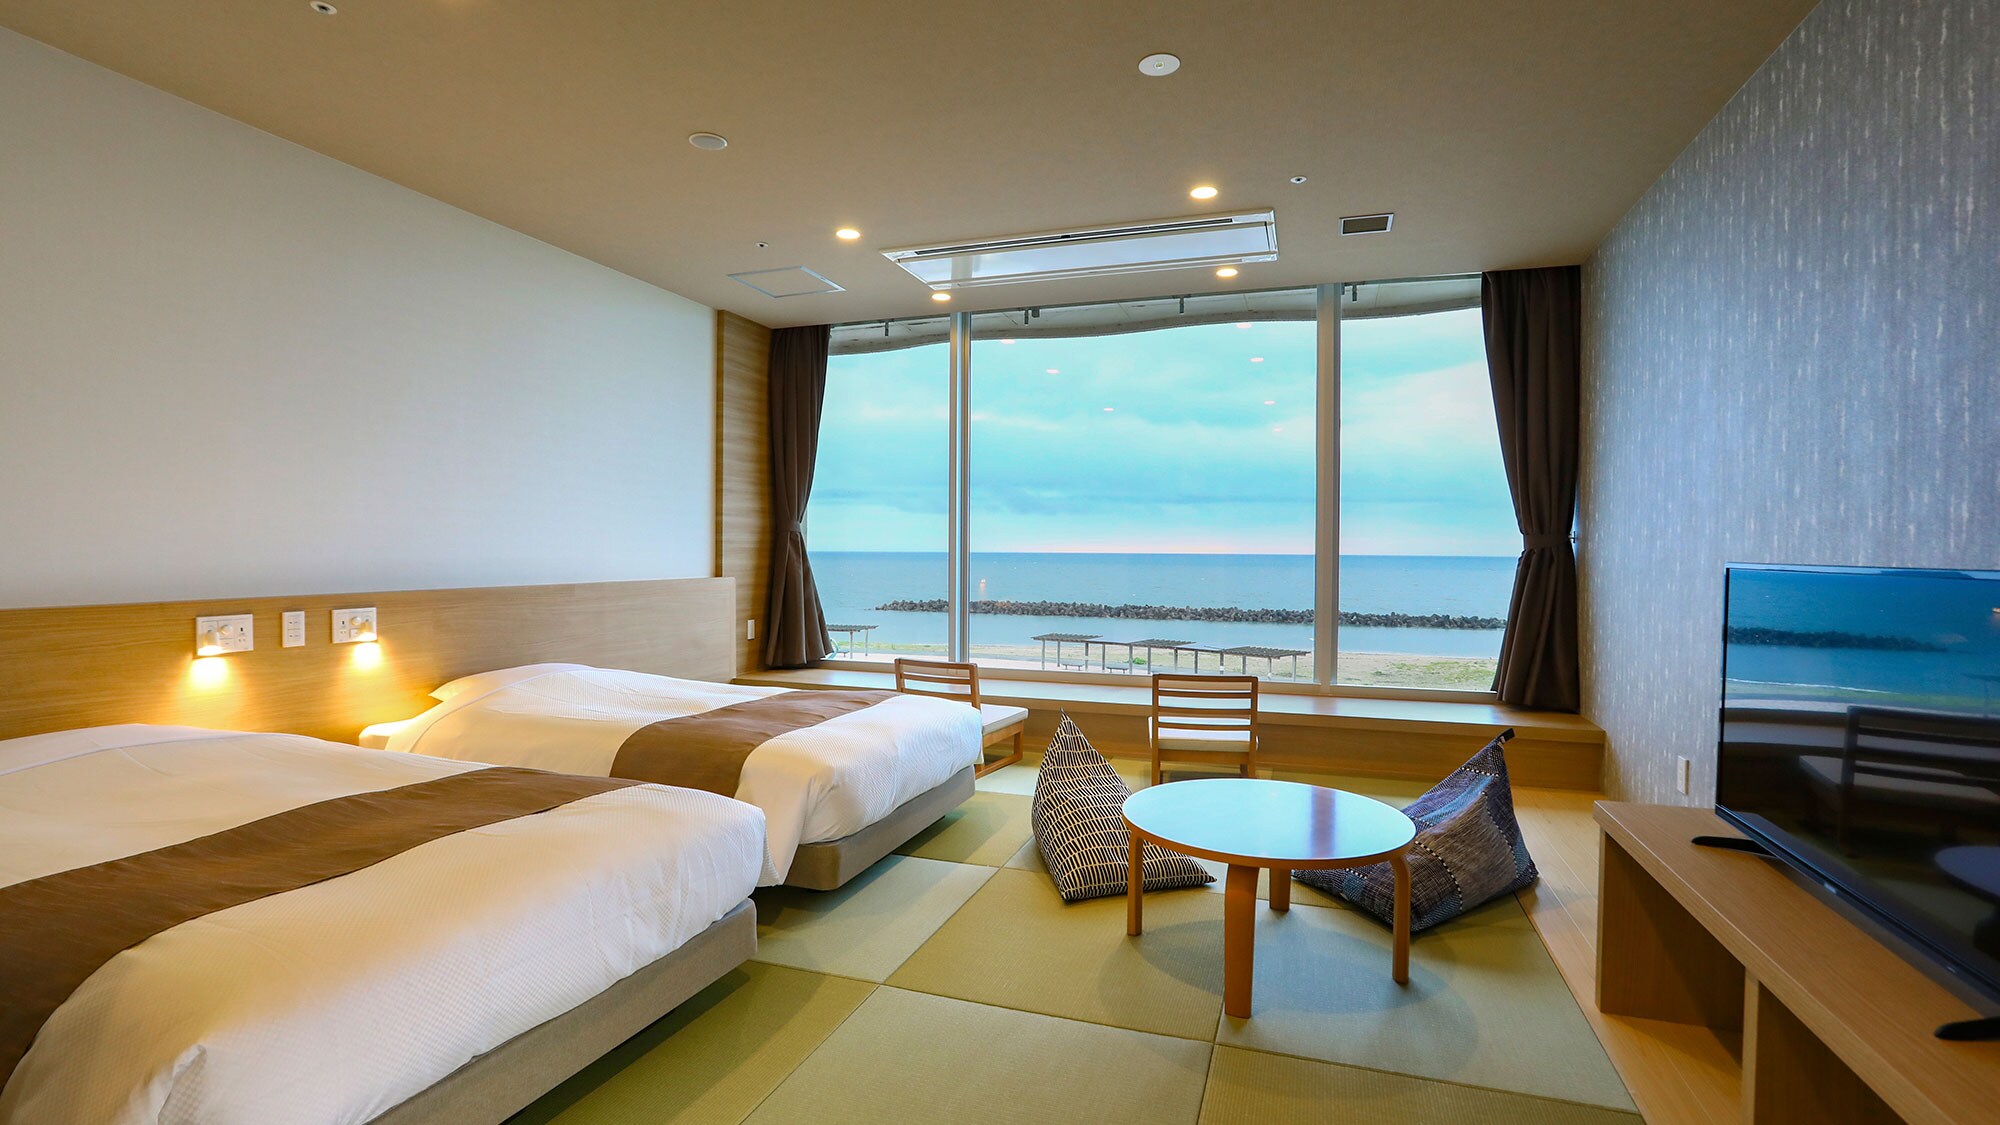 [Non-smoking] Ocean view twin Japanese-style room 3 people capacity